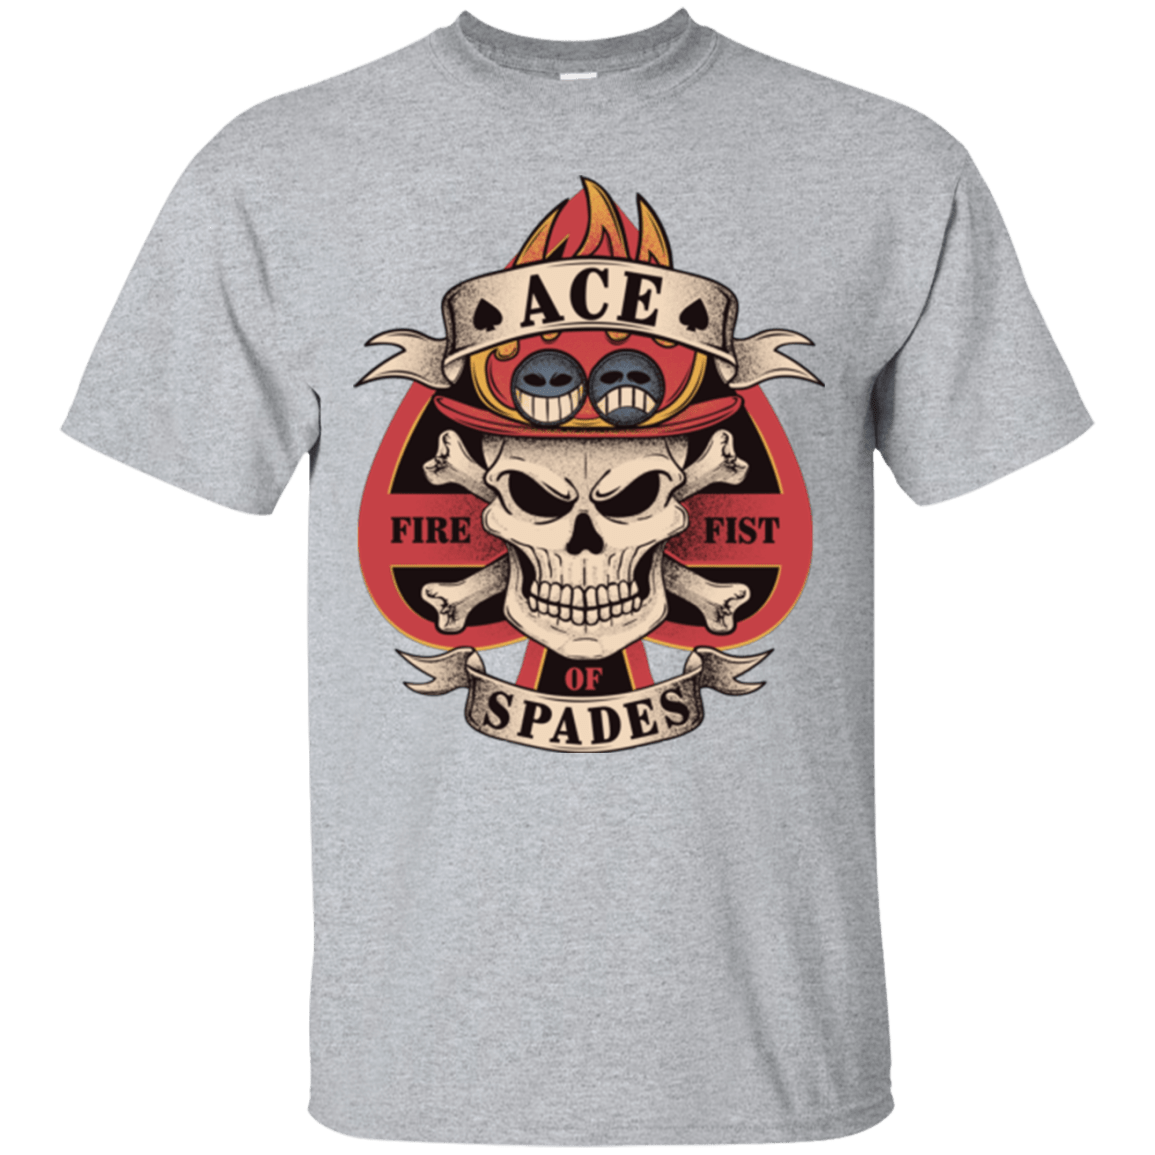 T-Shirts Sport Grey / Small Ace of Spades T-Shirt